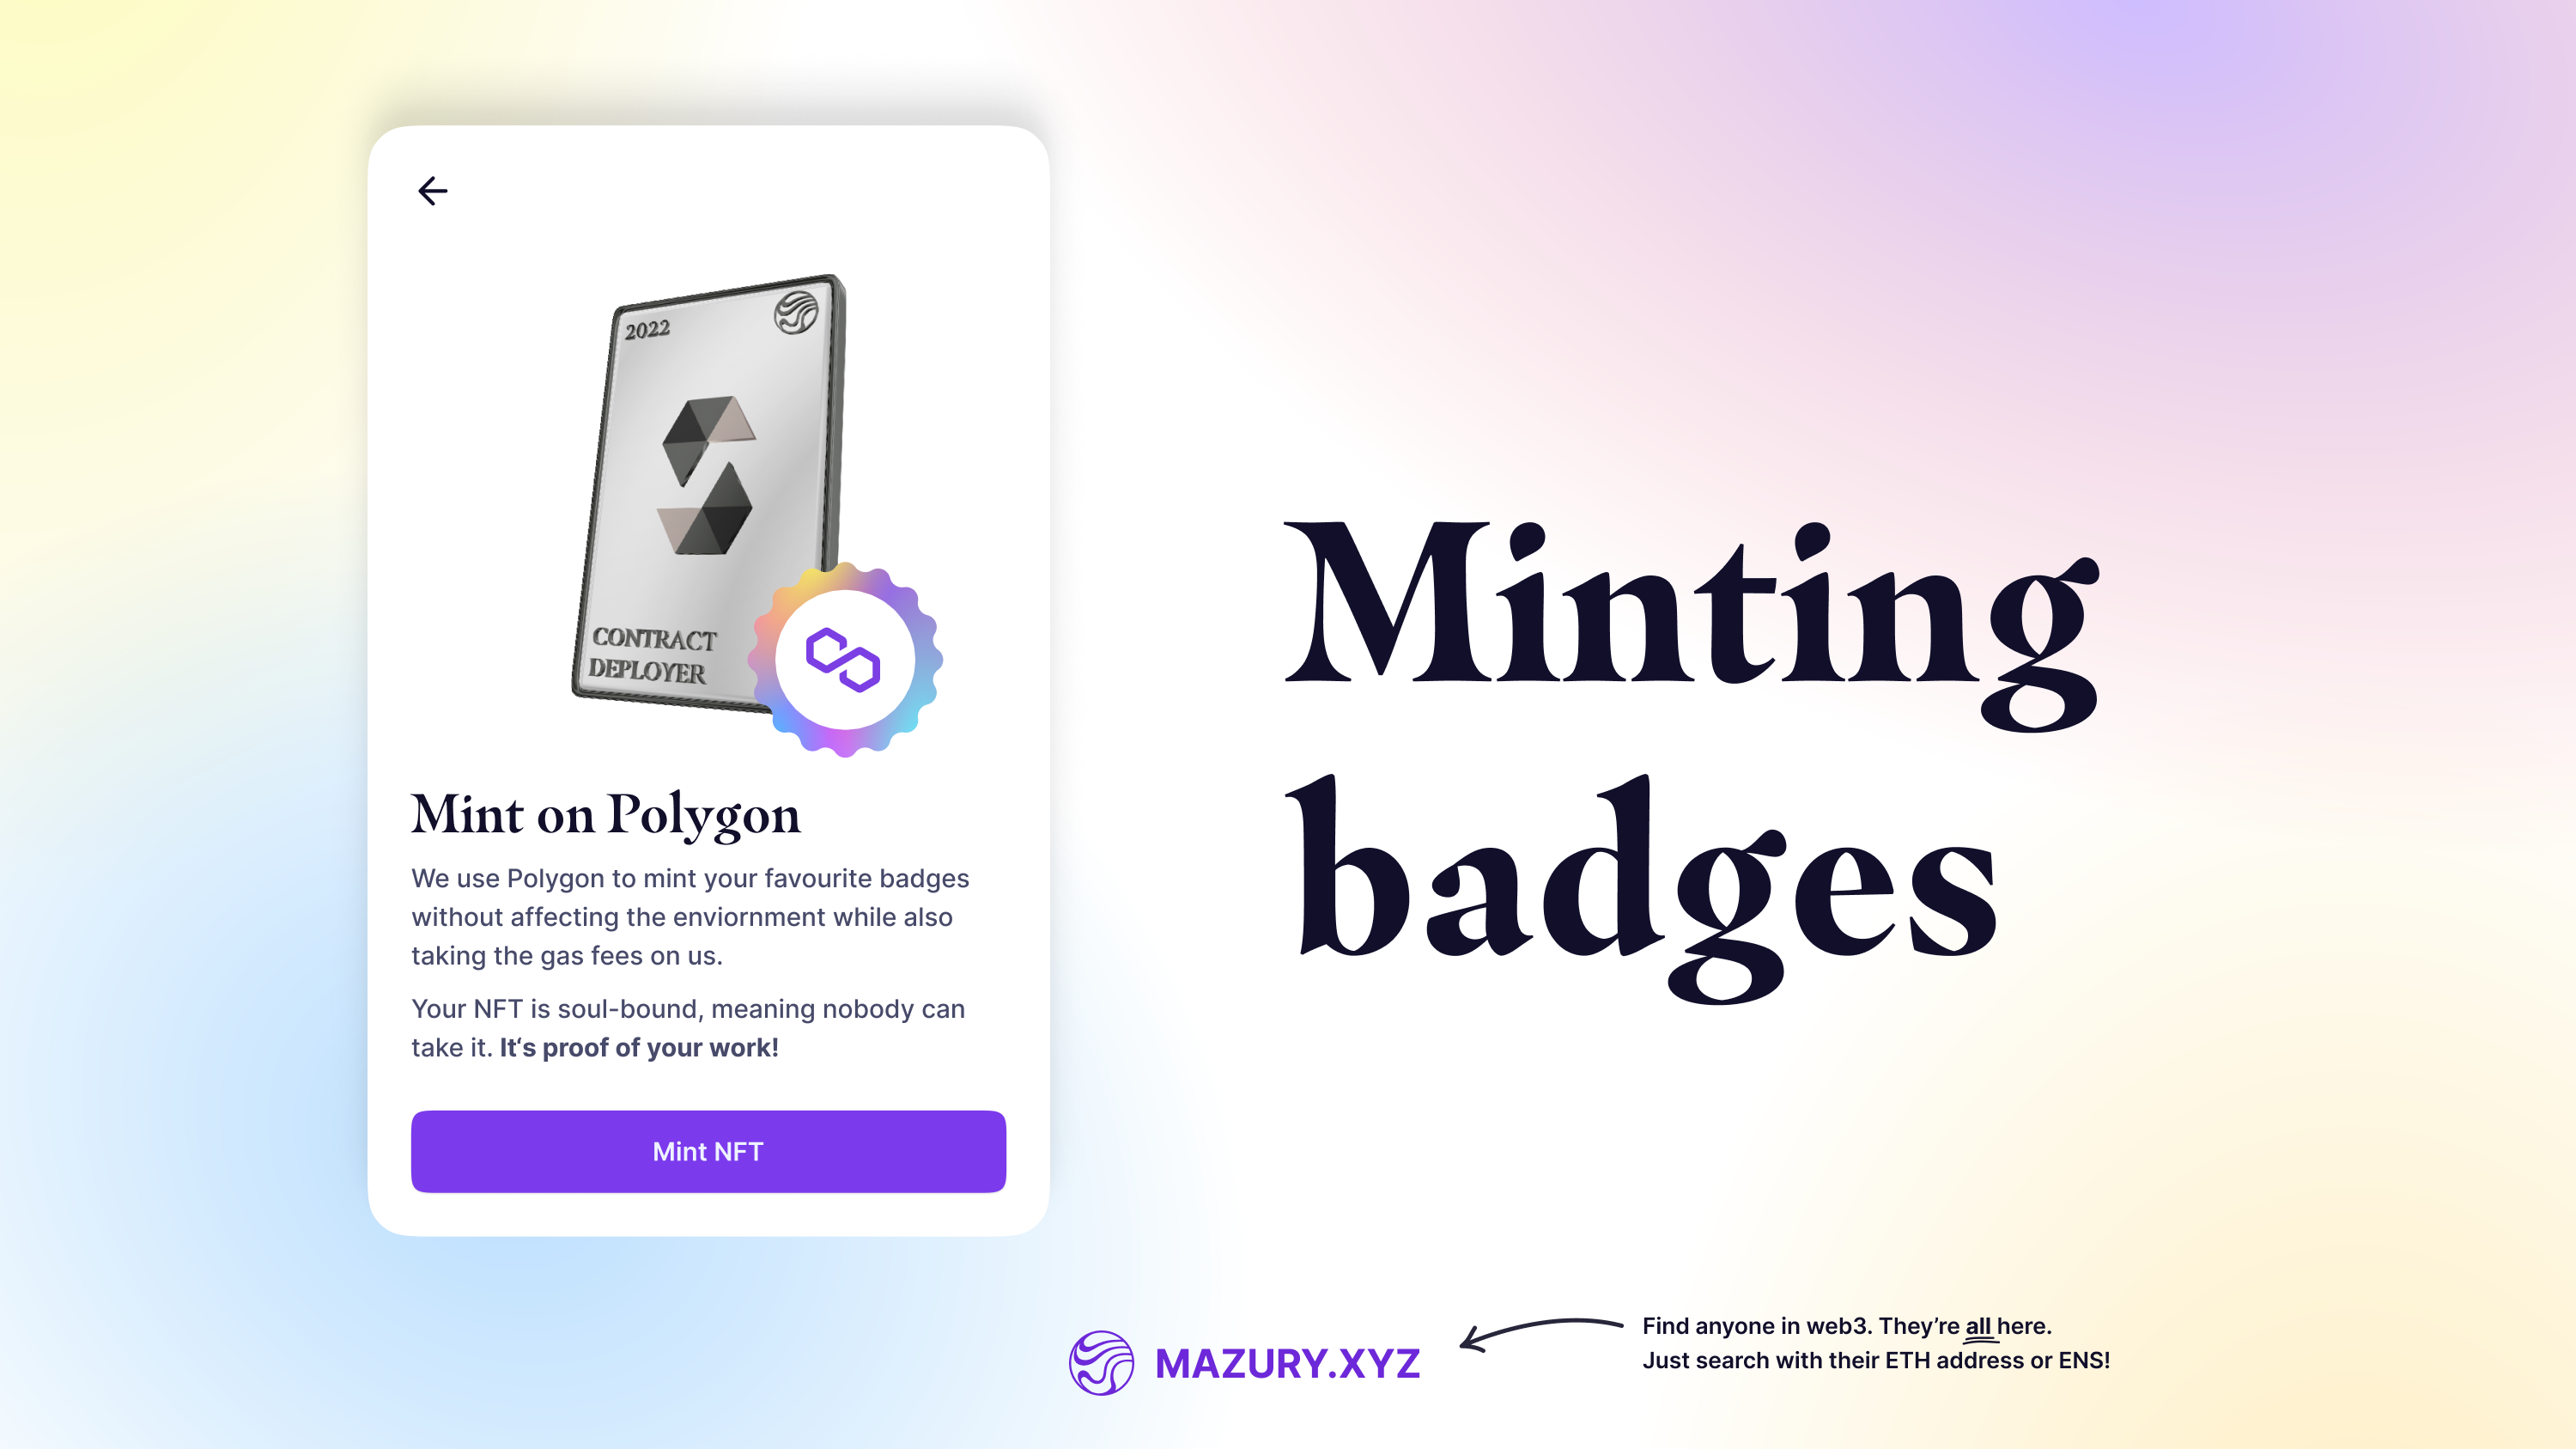 Mint your badges on Polygon